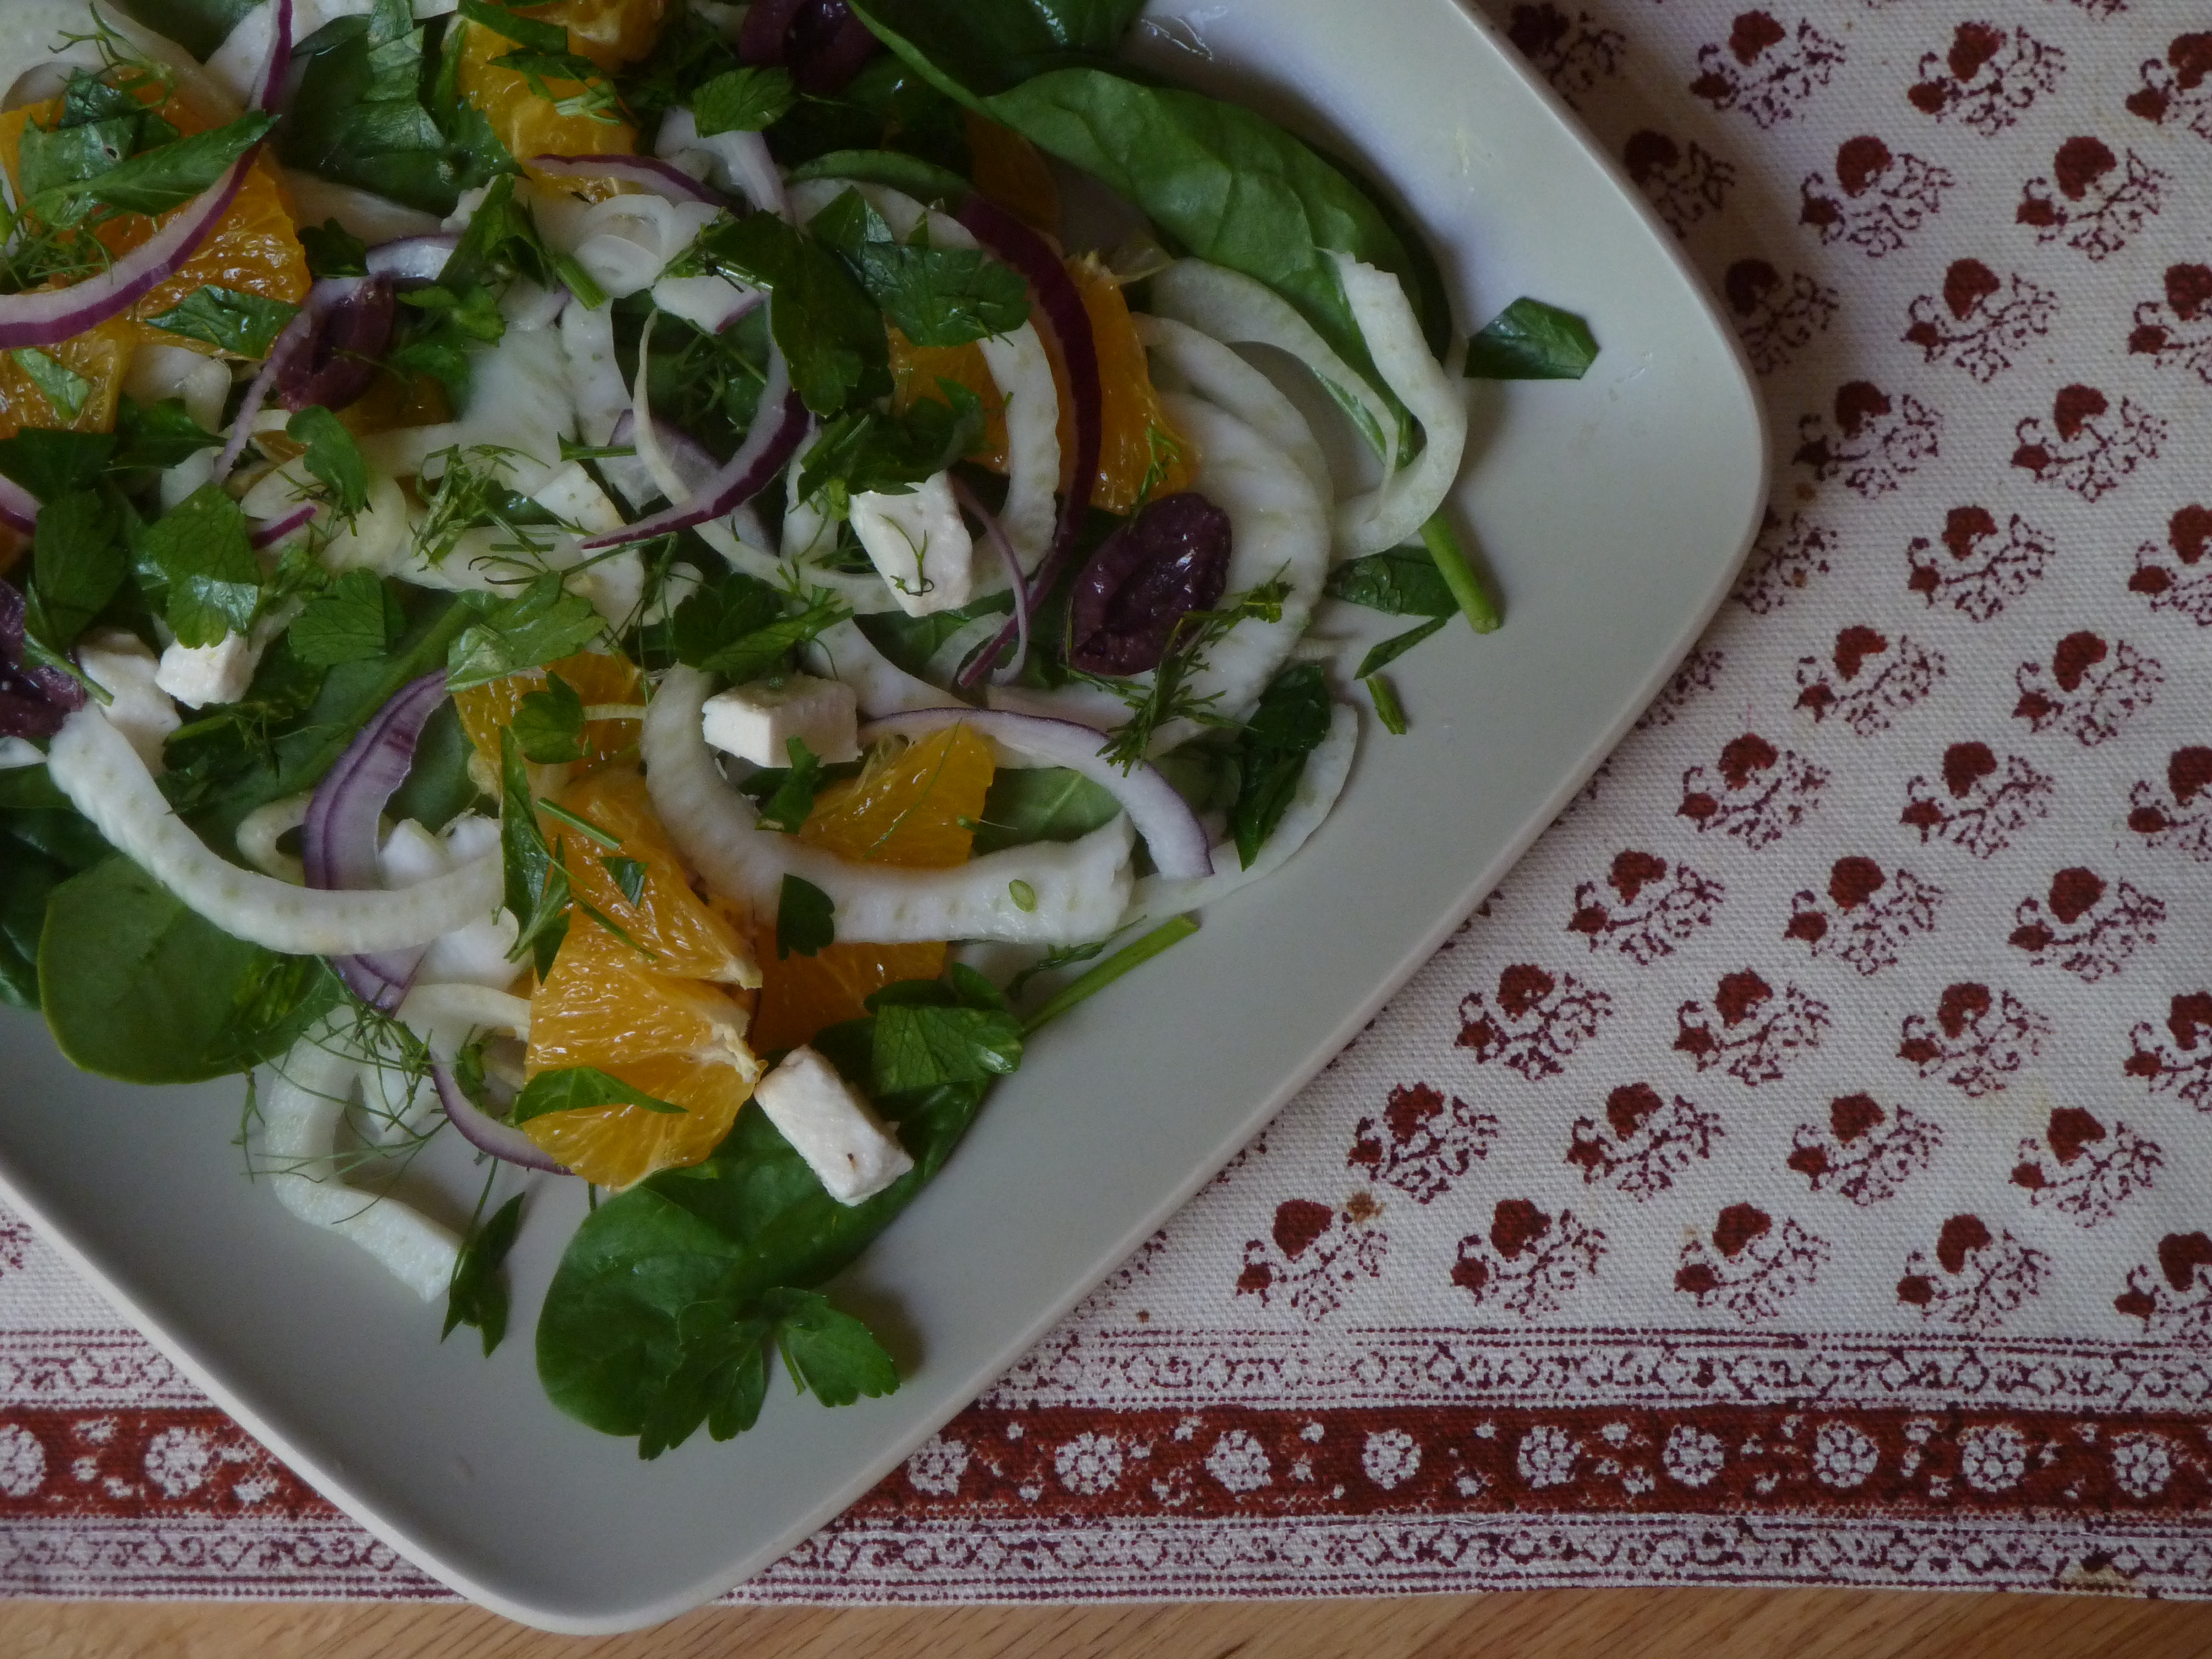 Fennel and Spinach Salad with Orange and Olives